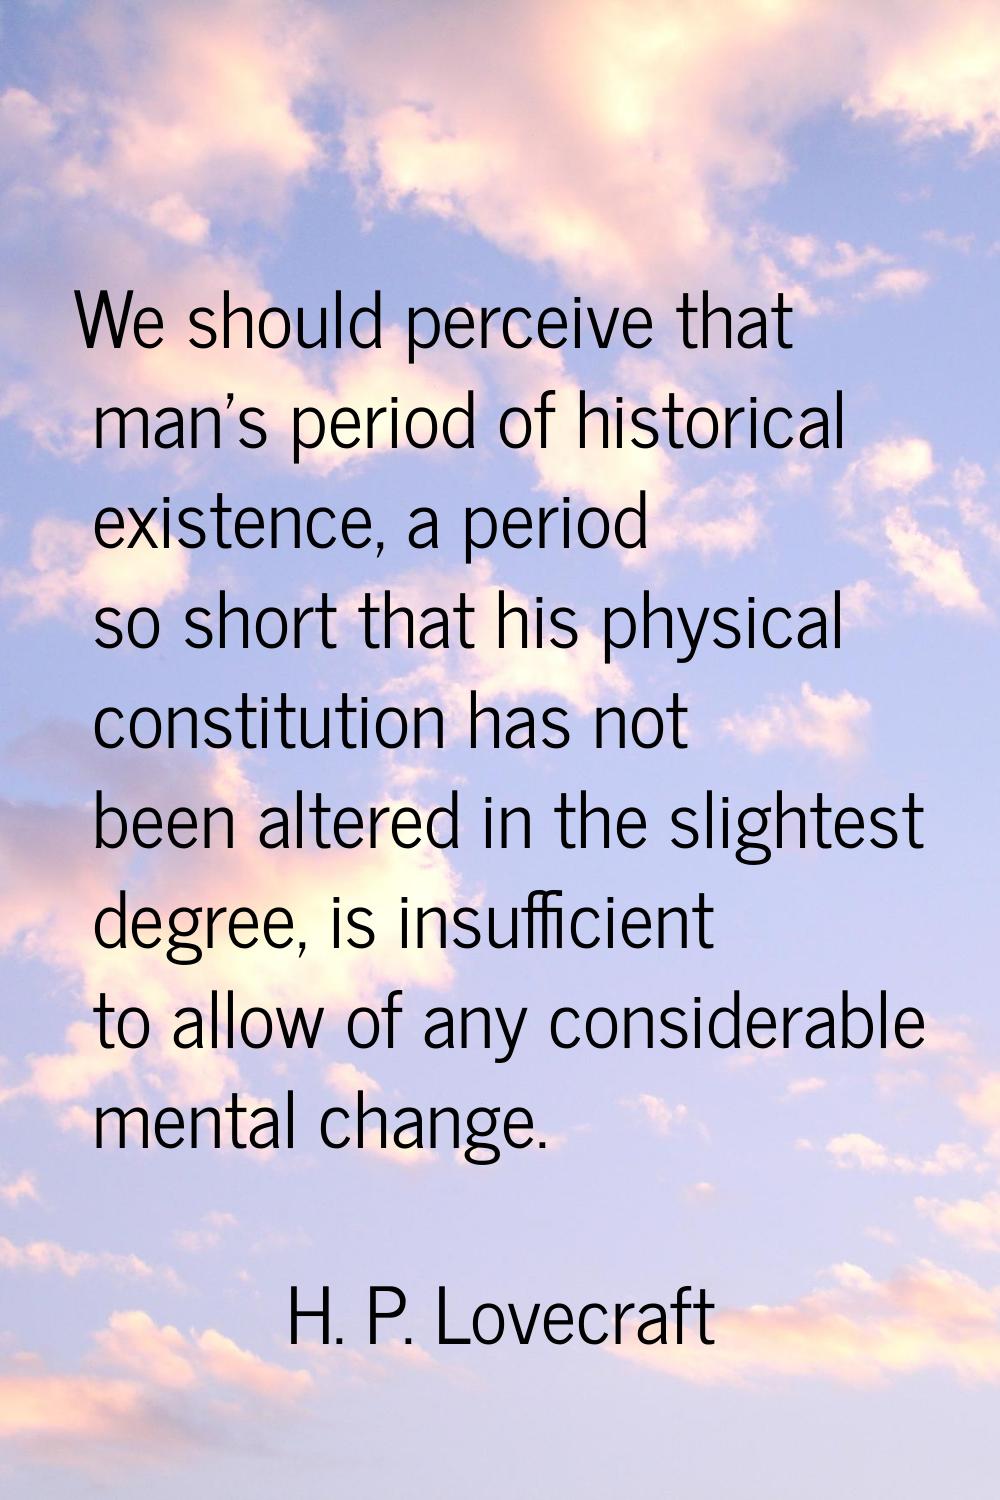 We should perceive that man's period of historical existence, a period so short that his physical c